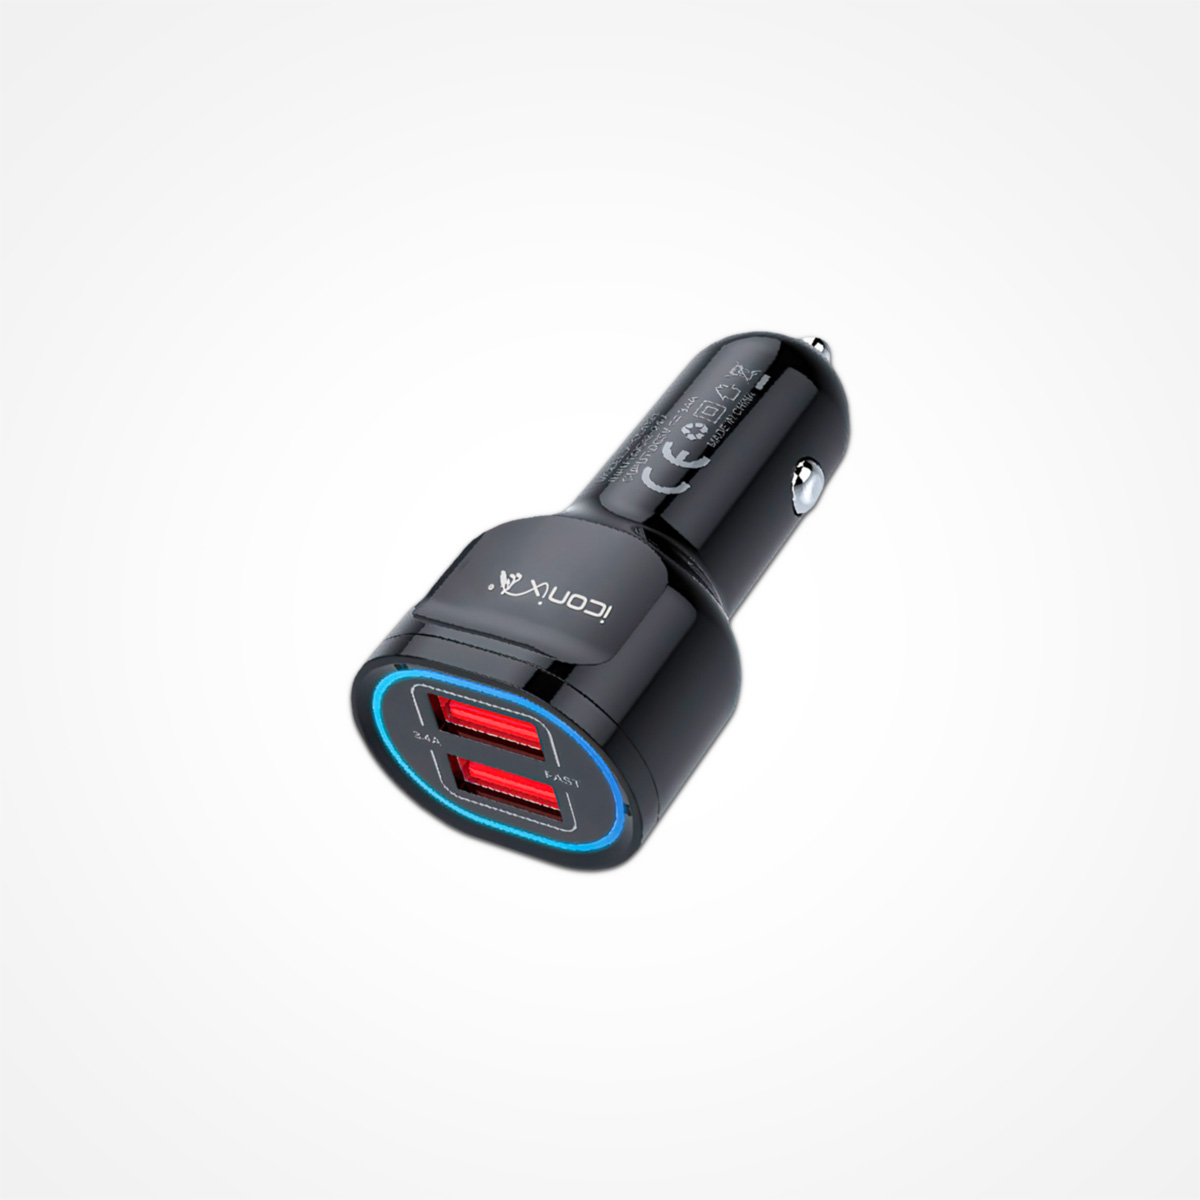 CAR CHARGER FOR USB ANDROID/IOS I CONIX-3.4A IC-CC1716 راسيه شاحن سياره مخرجين ,Smartphones & Tab Chargers